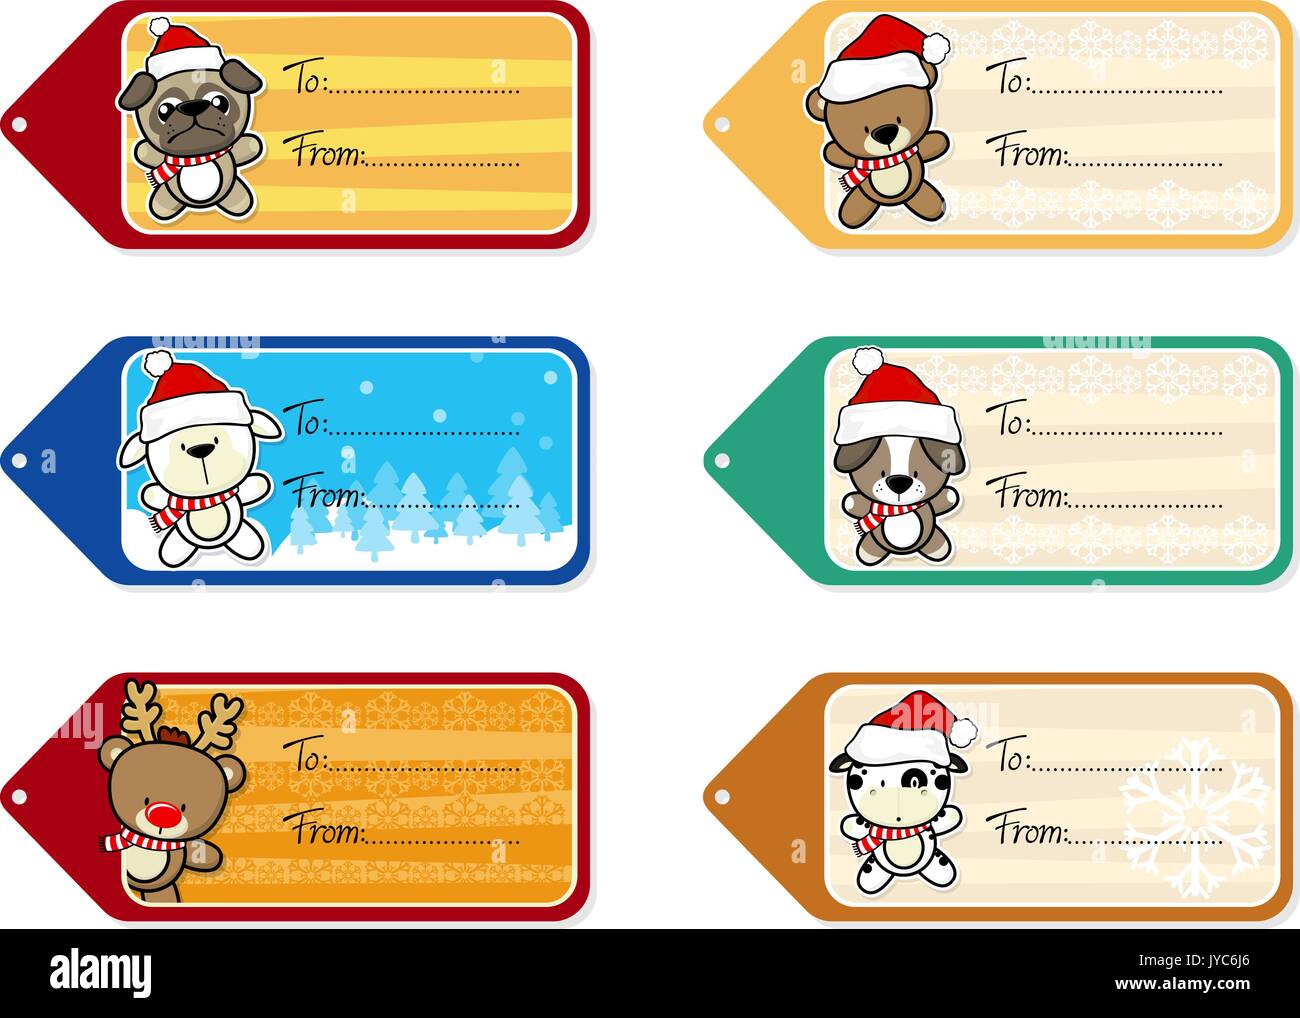 Blank Gift Tags With Santa Claus, Isolated On White Background